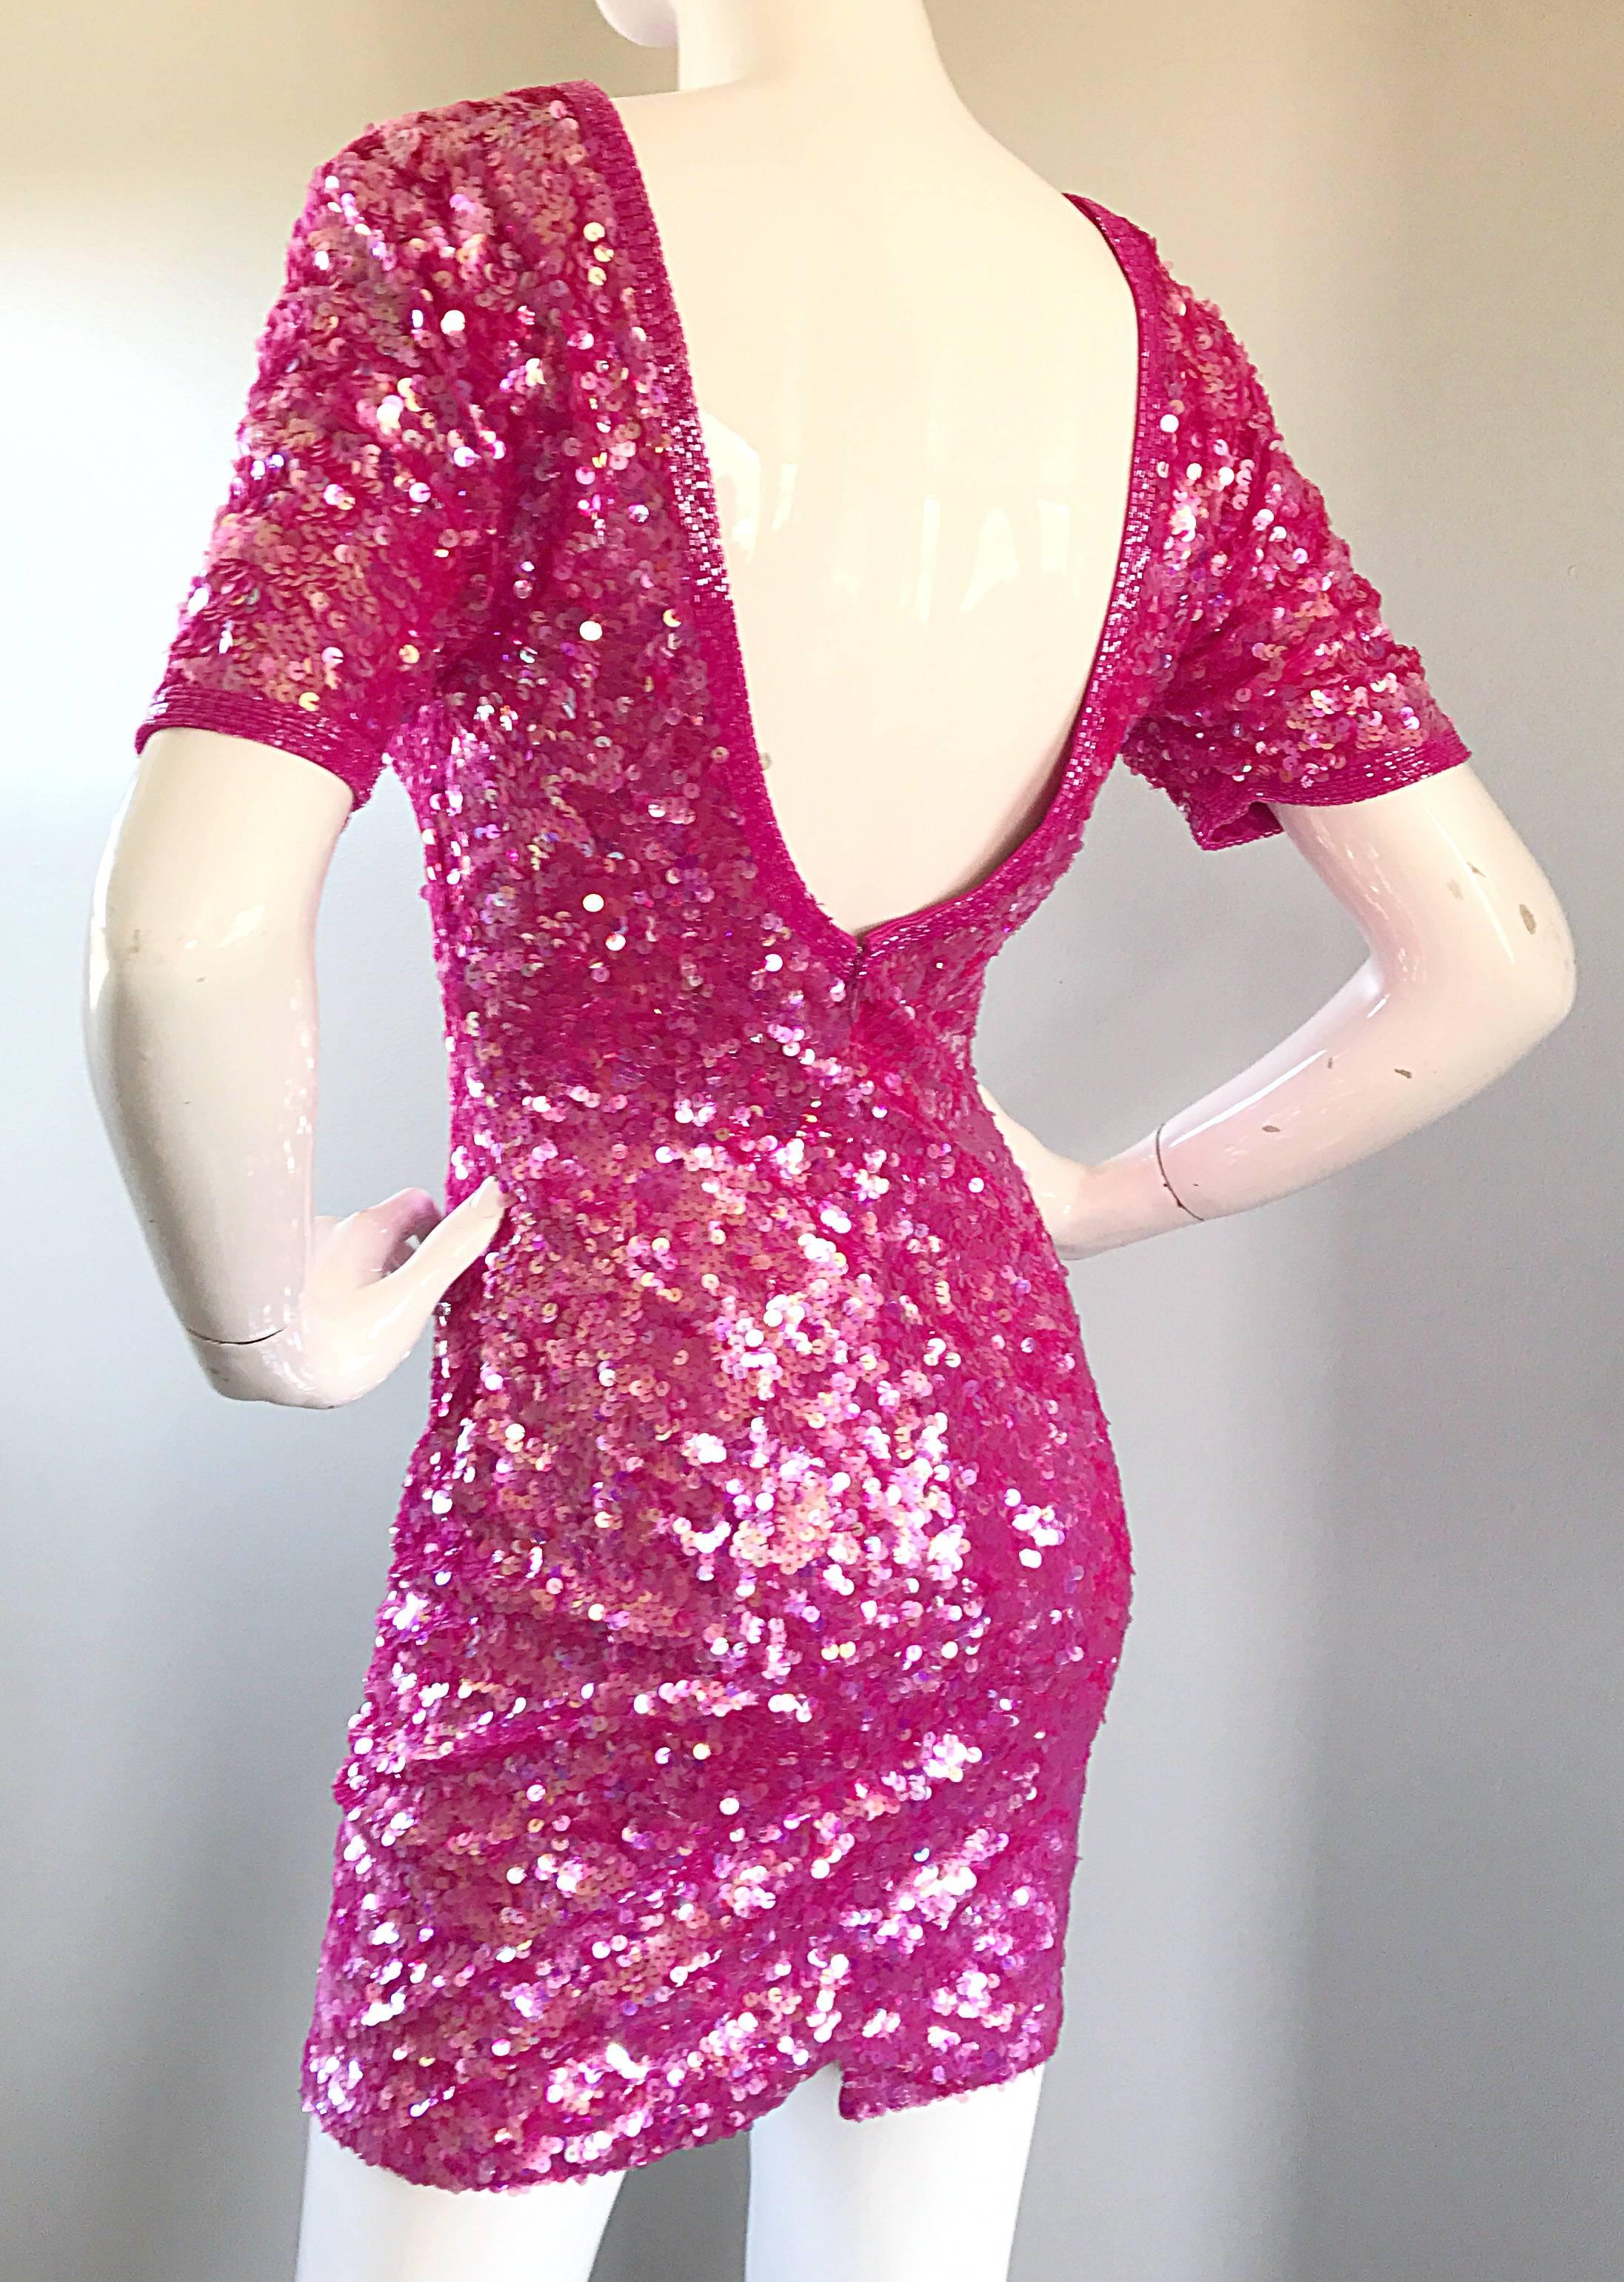 Incredible Vintage Lillie Rubin 1990s Hot Pink Fully Sequined 90s Mini Dress For Sale 3